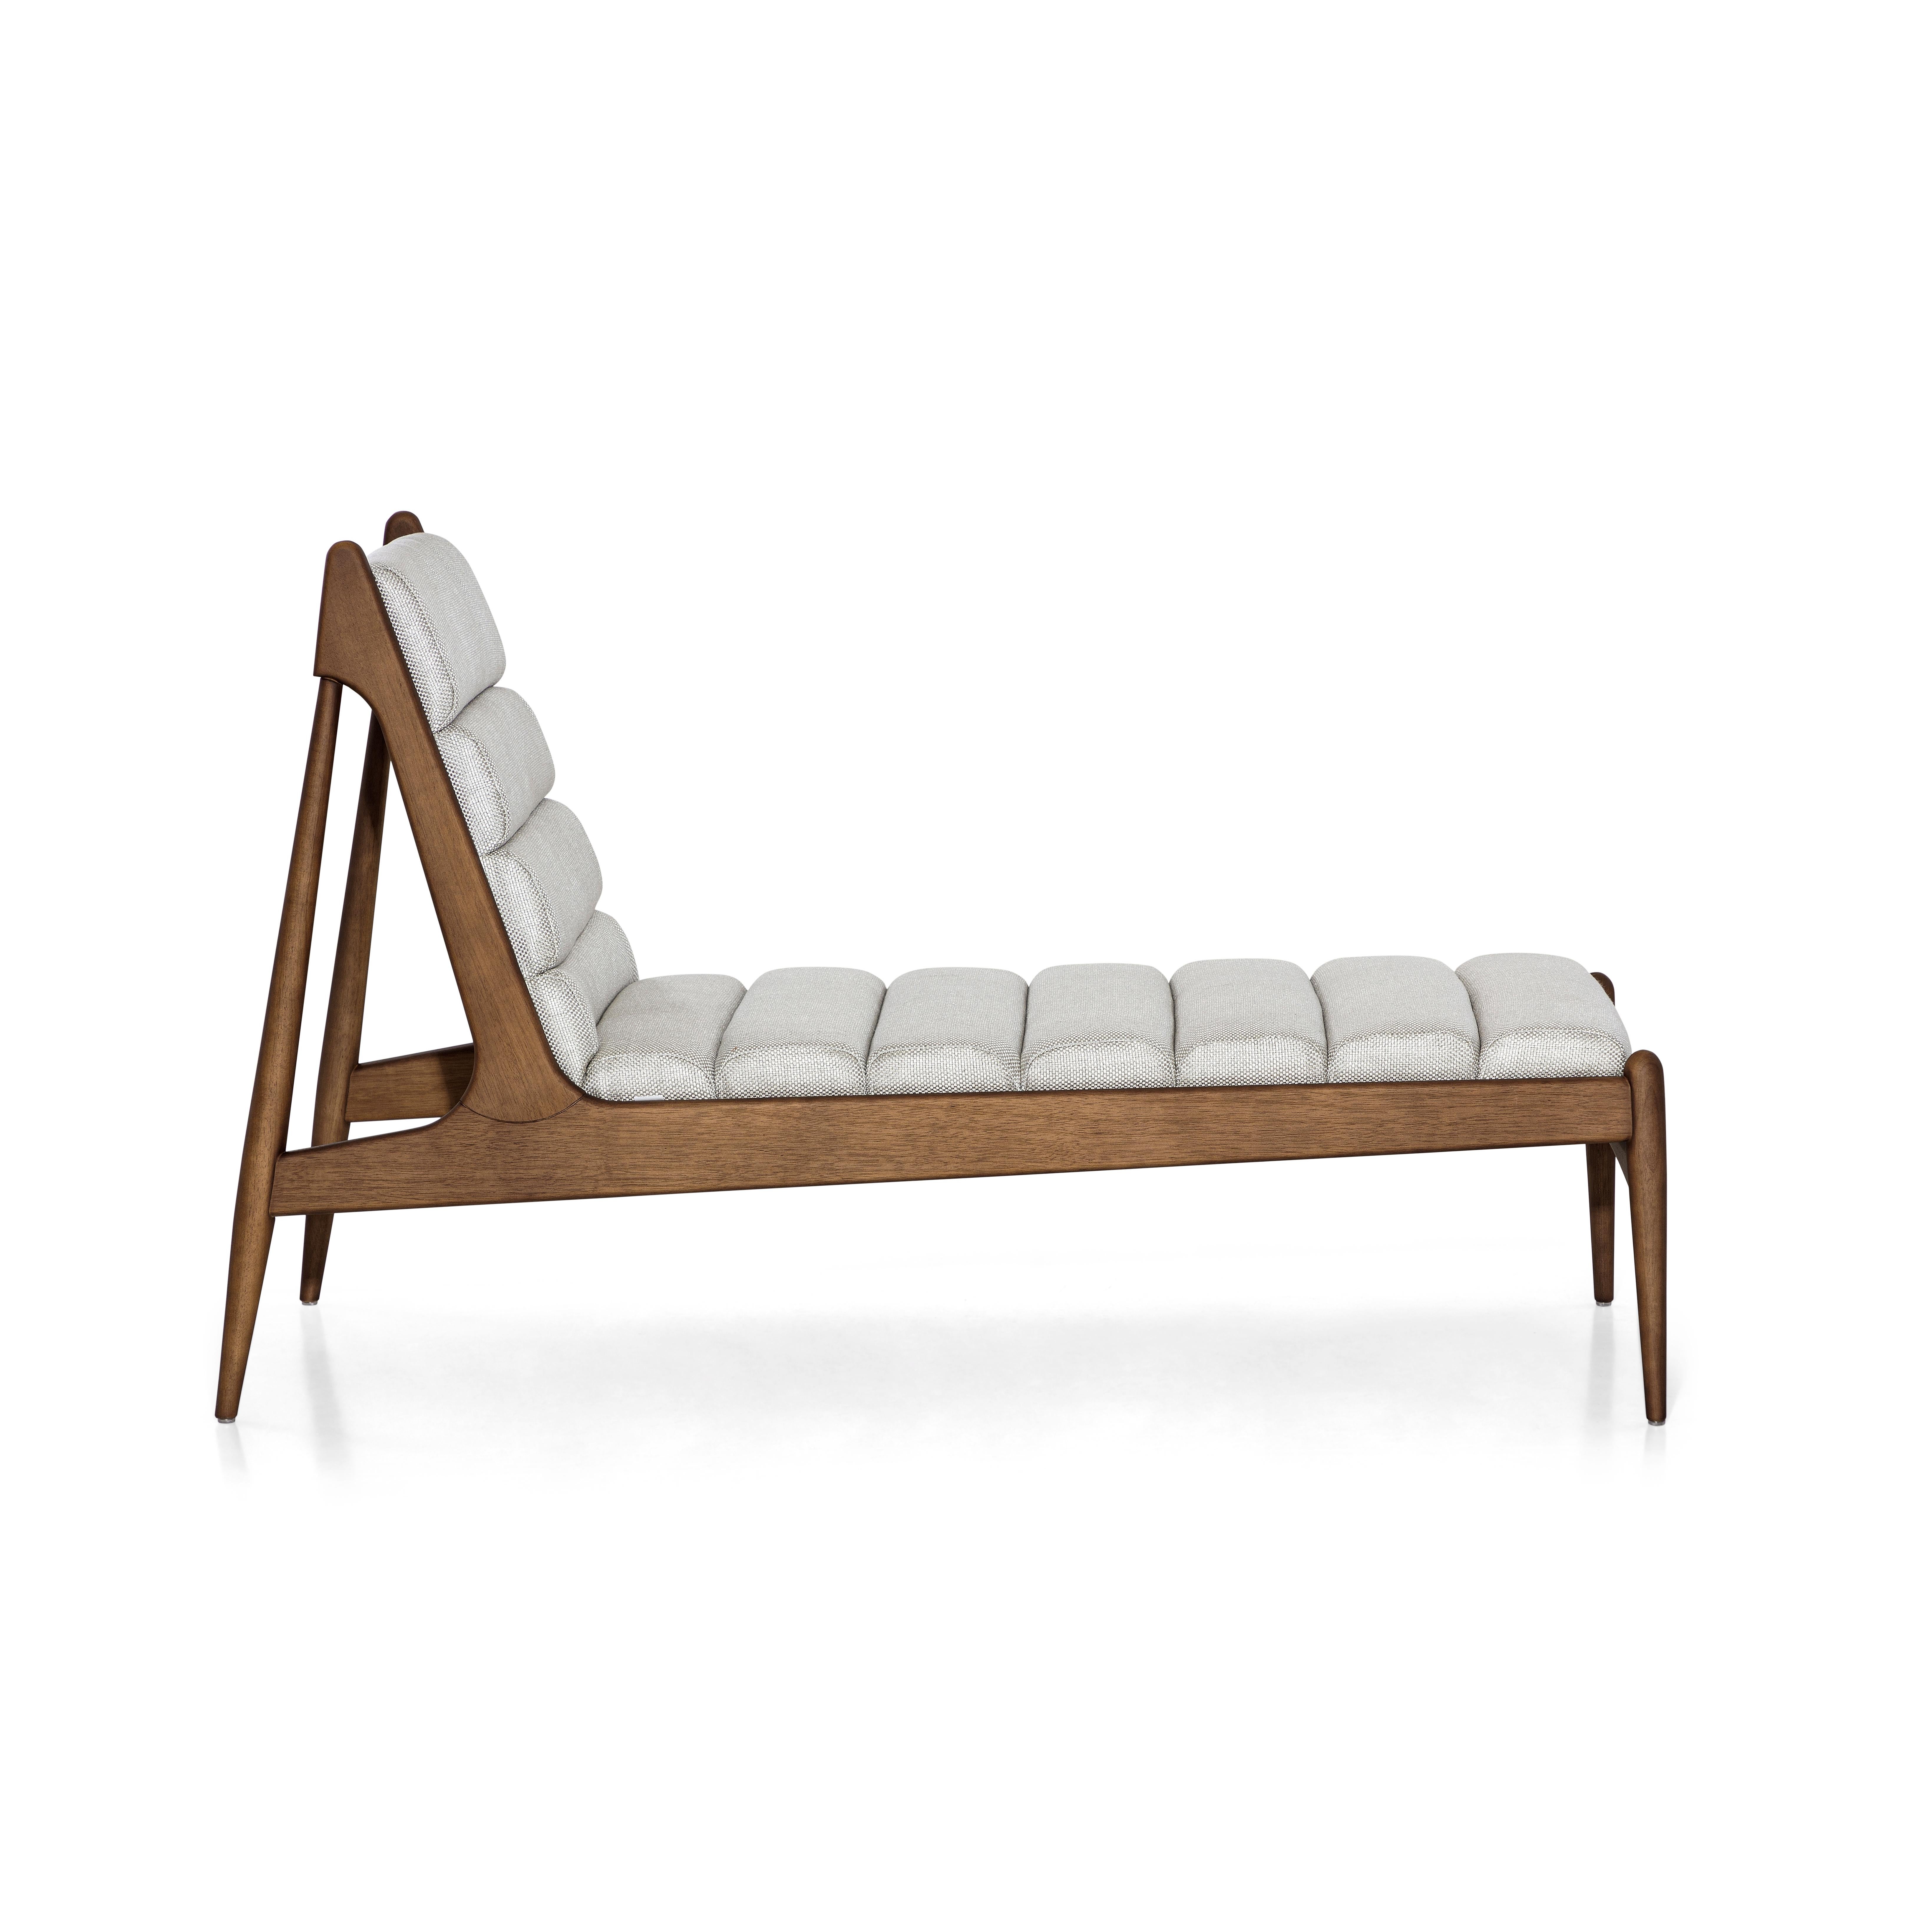 The Wave indoor chaise lounge in a walnut wood Uultis finish, and its upholstery reminiscent of waves in an off-white fabric, is the perfect addition for any contemporary, minimalist or traditional design project. This chaise is the ideal chair to